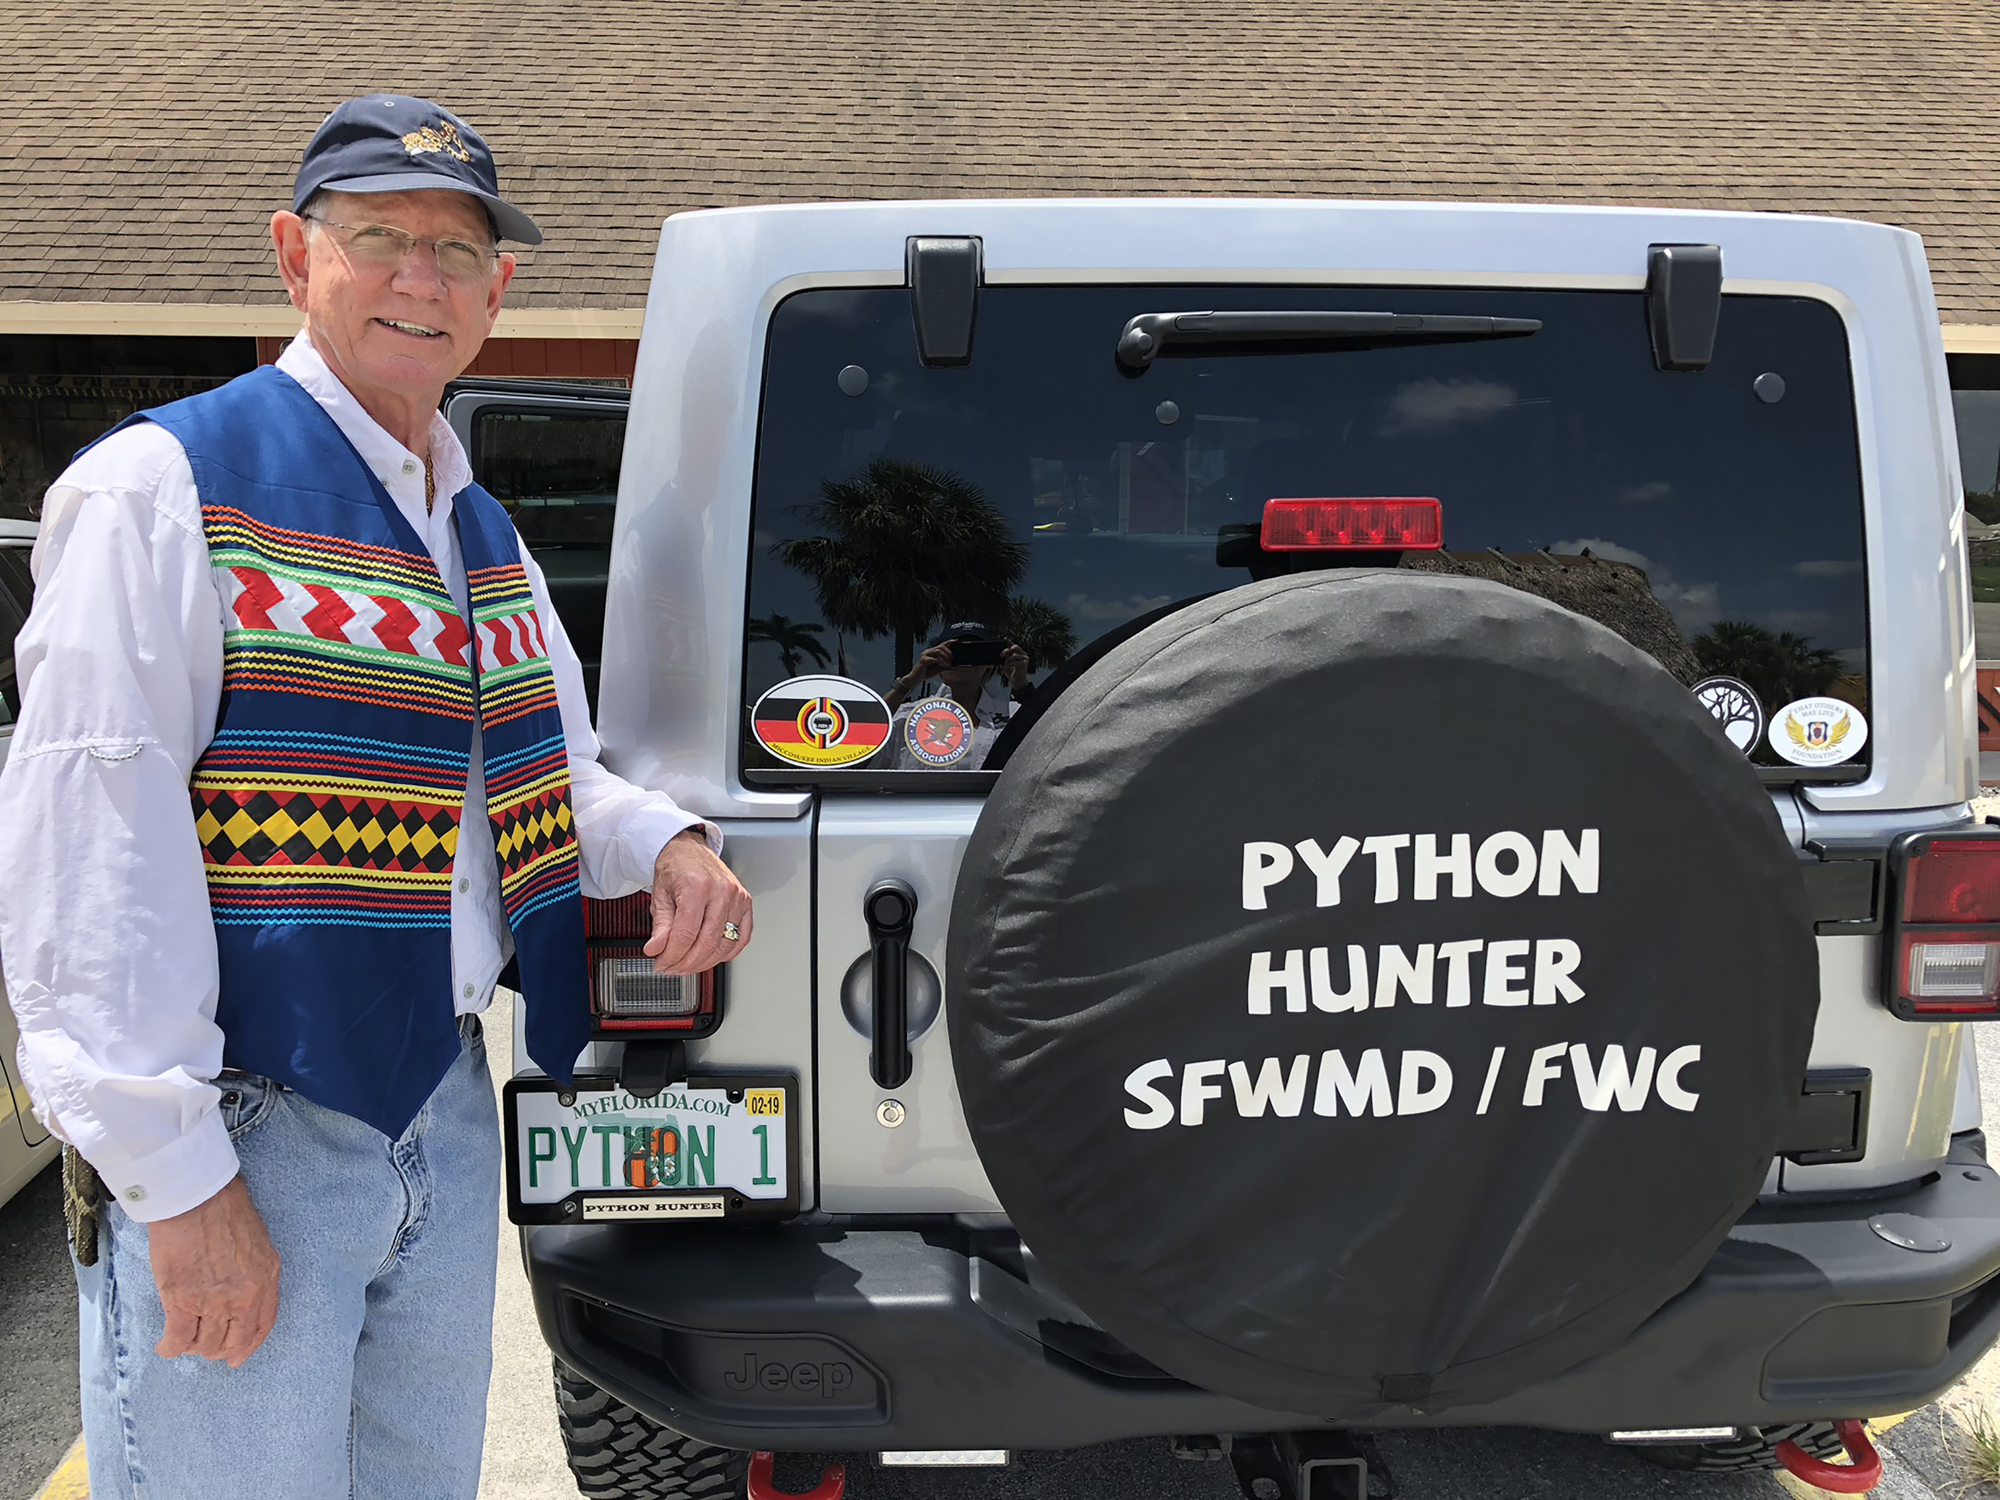 Edison National Bank CEO Geoff Roepstorff bought a Jeep and outfitted it for python hunting. Courtesy Geoff and Robbie  Roepstorff